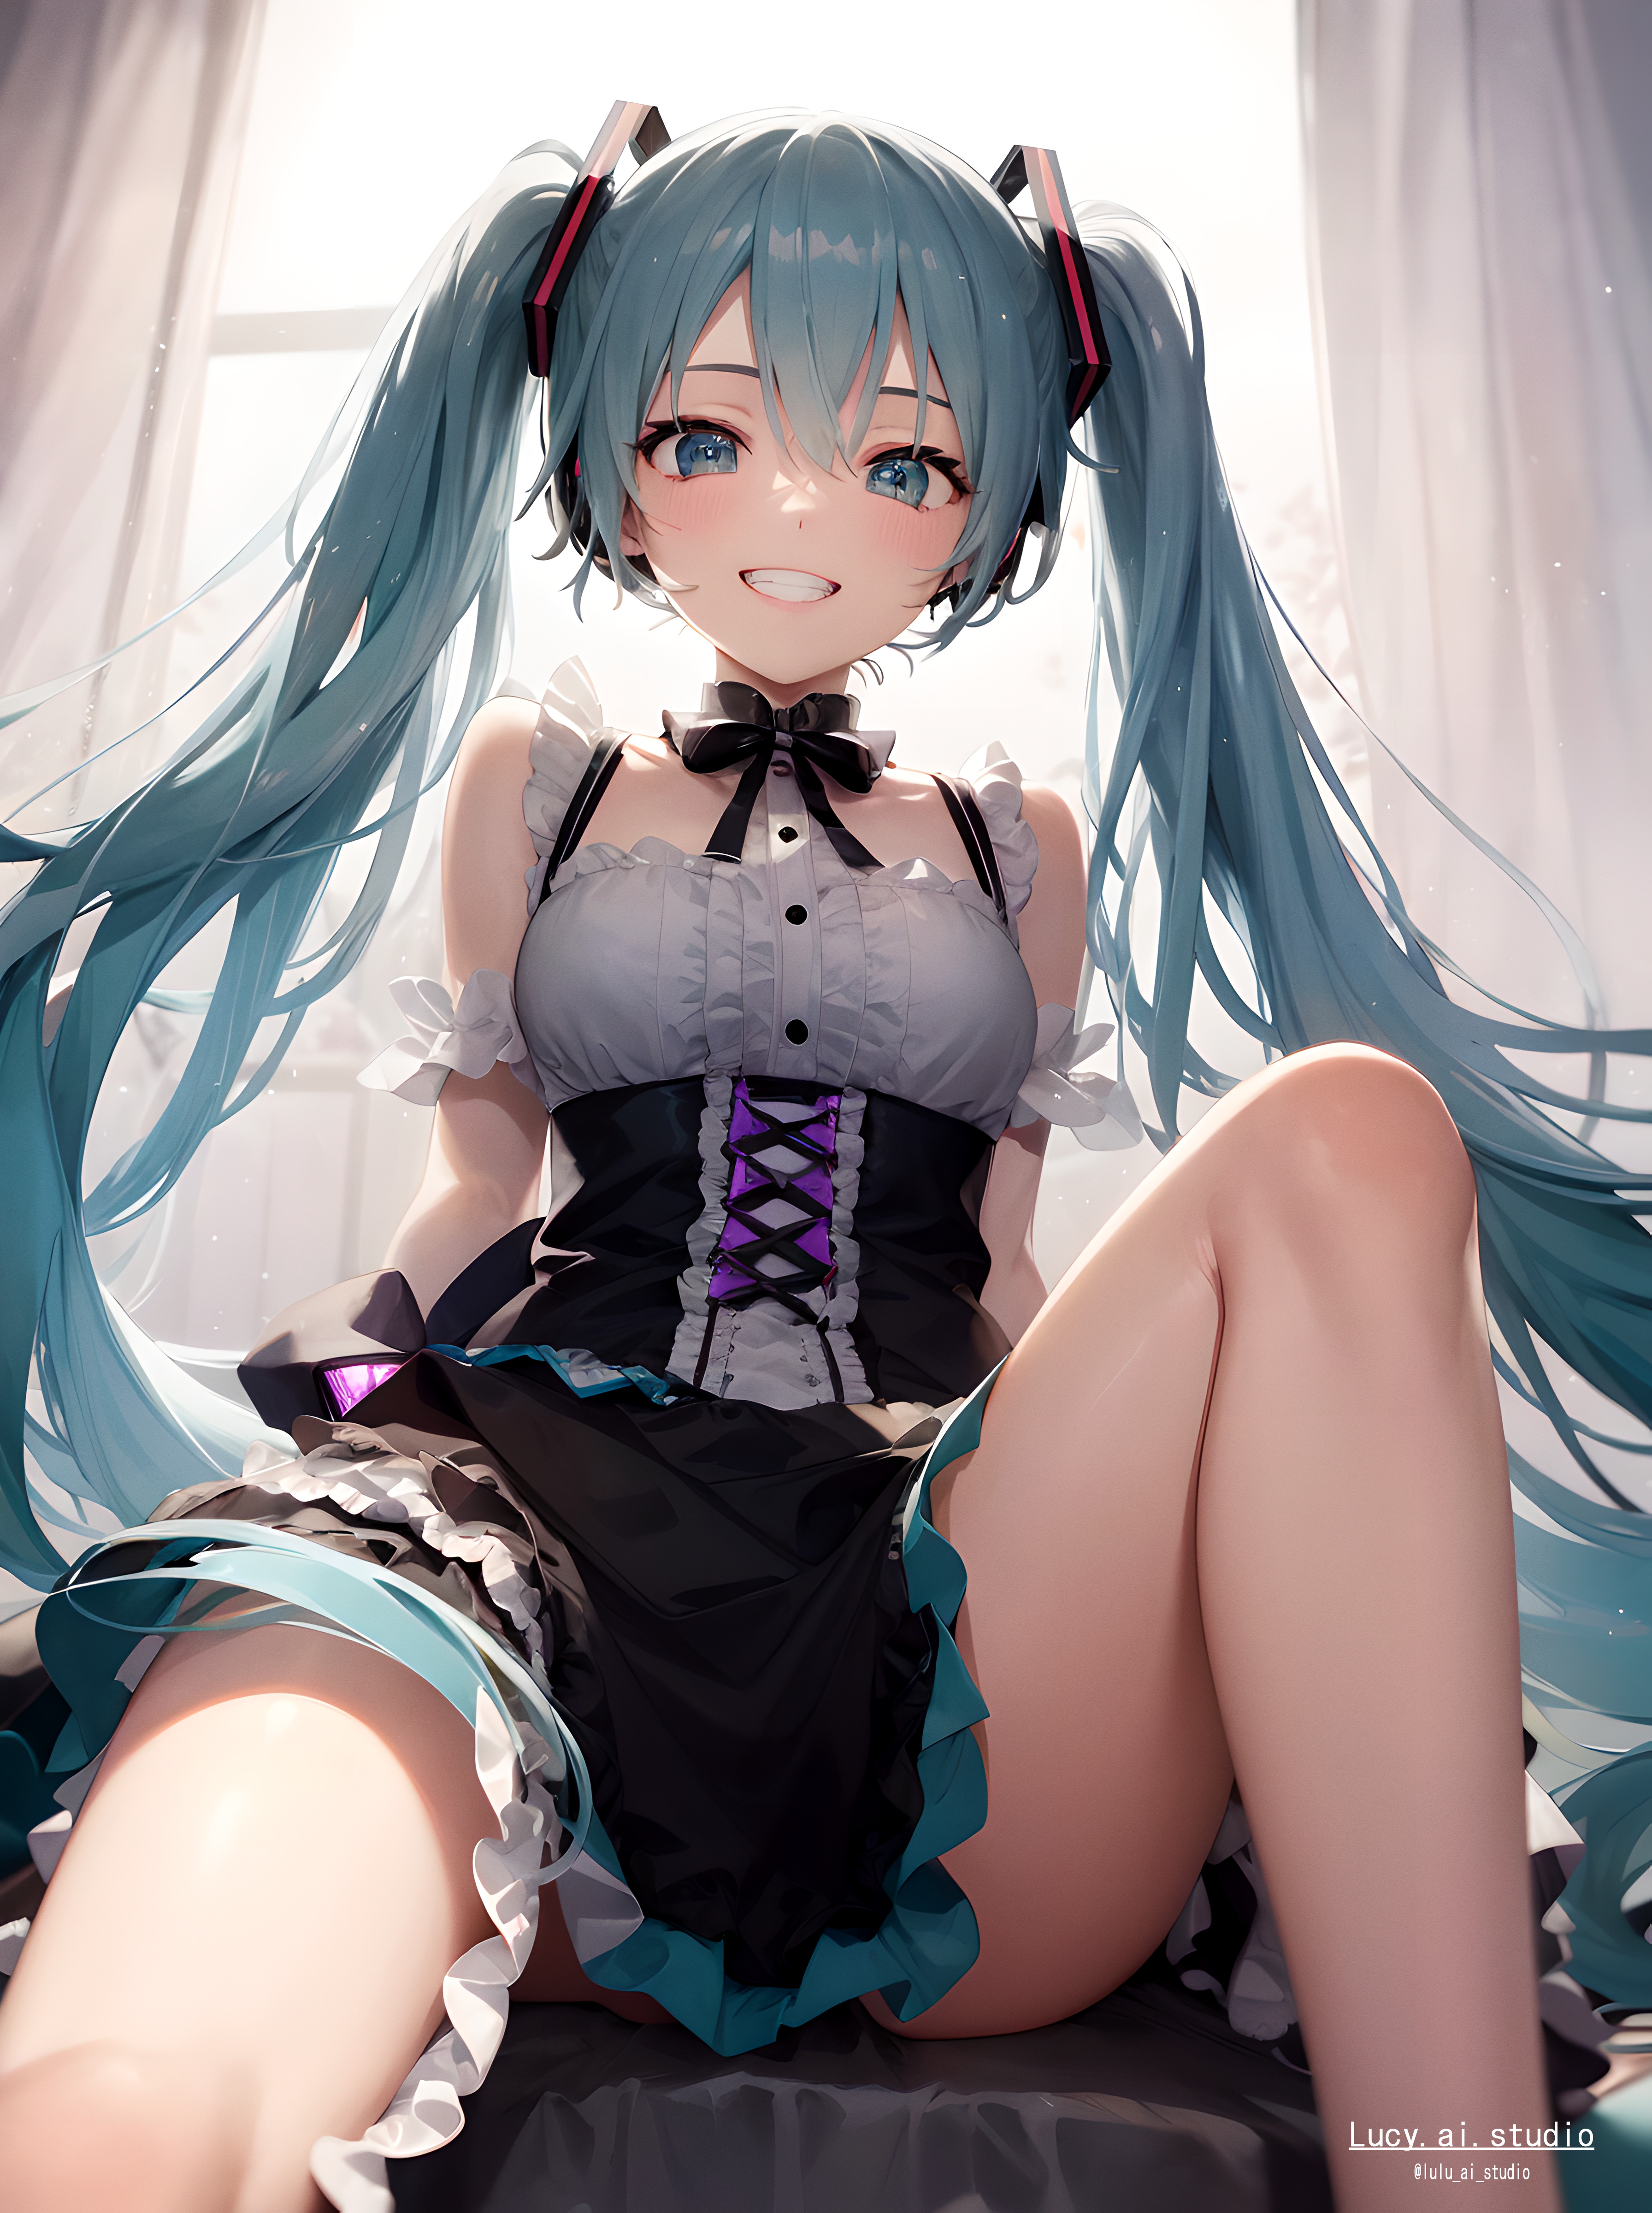 Anime 3584x4800 anime anime girls Vocaloid Hatsune Miku AI art Lucy (Artist) portrait display twintails smiling maid outfit bow tie